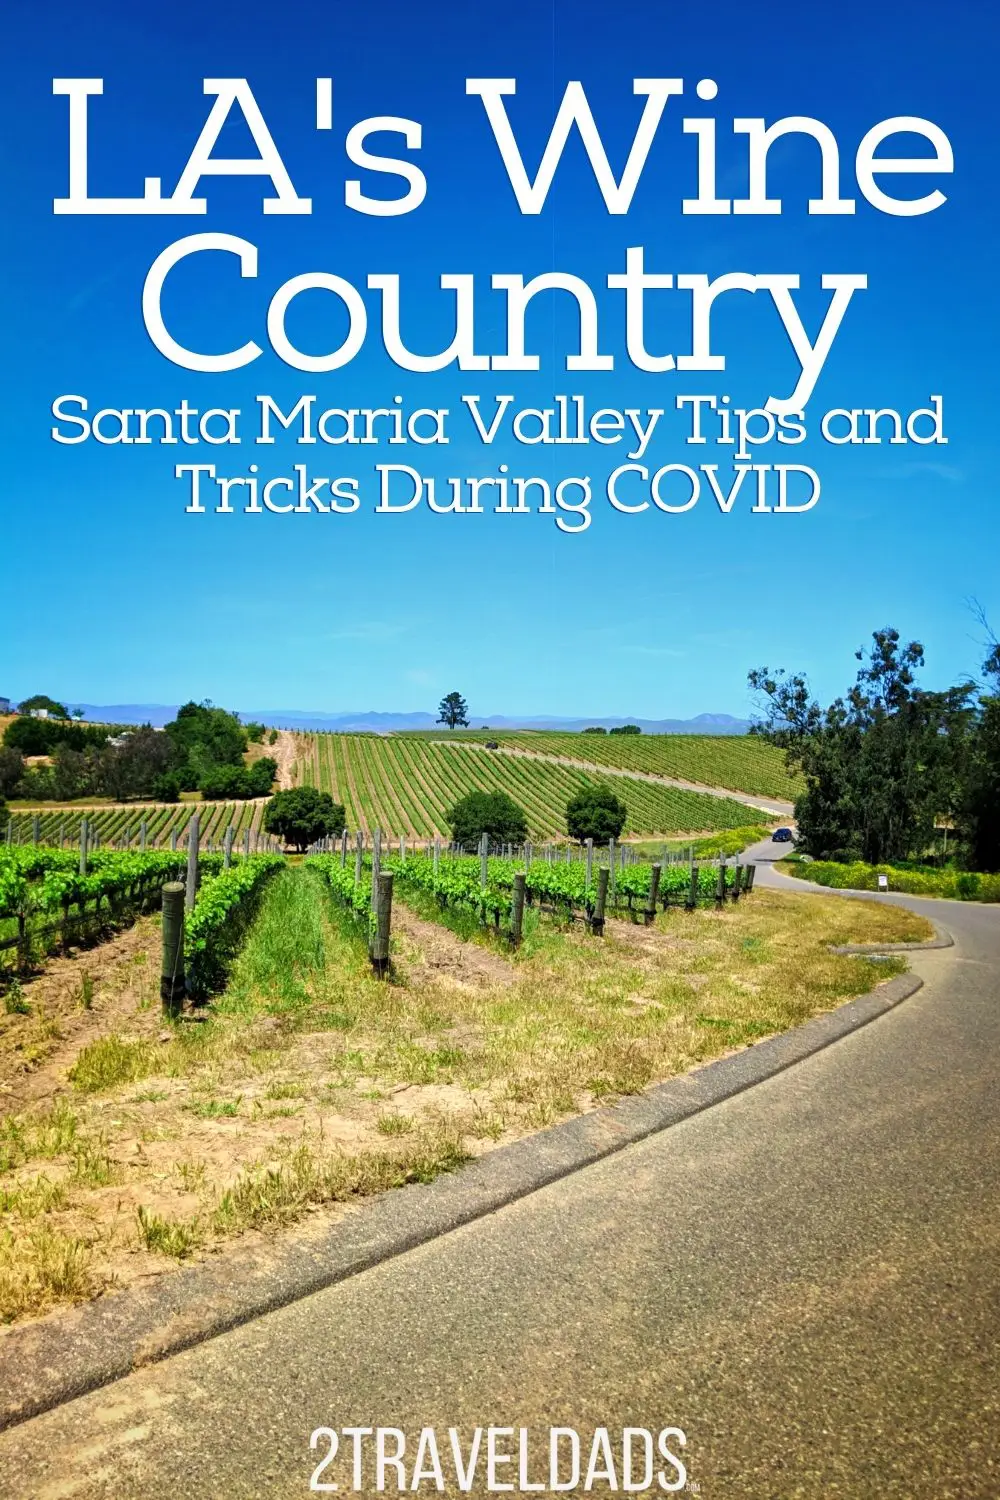 The Santa Maria Valley wine country is one of our favorite wine regions. During the COVID pandemic, LA's wine country is still open with precautions and new wine experiences. See hot to visit SMV wine country RIGHT NOW!